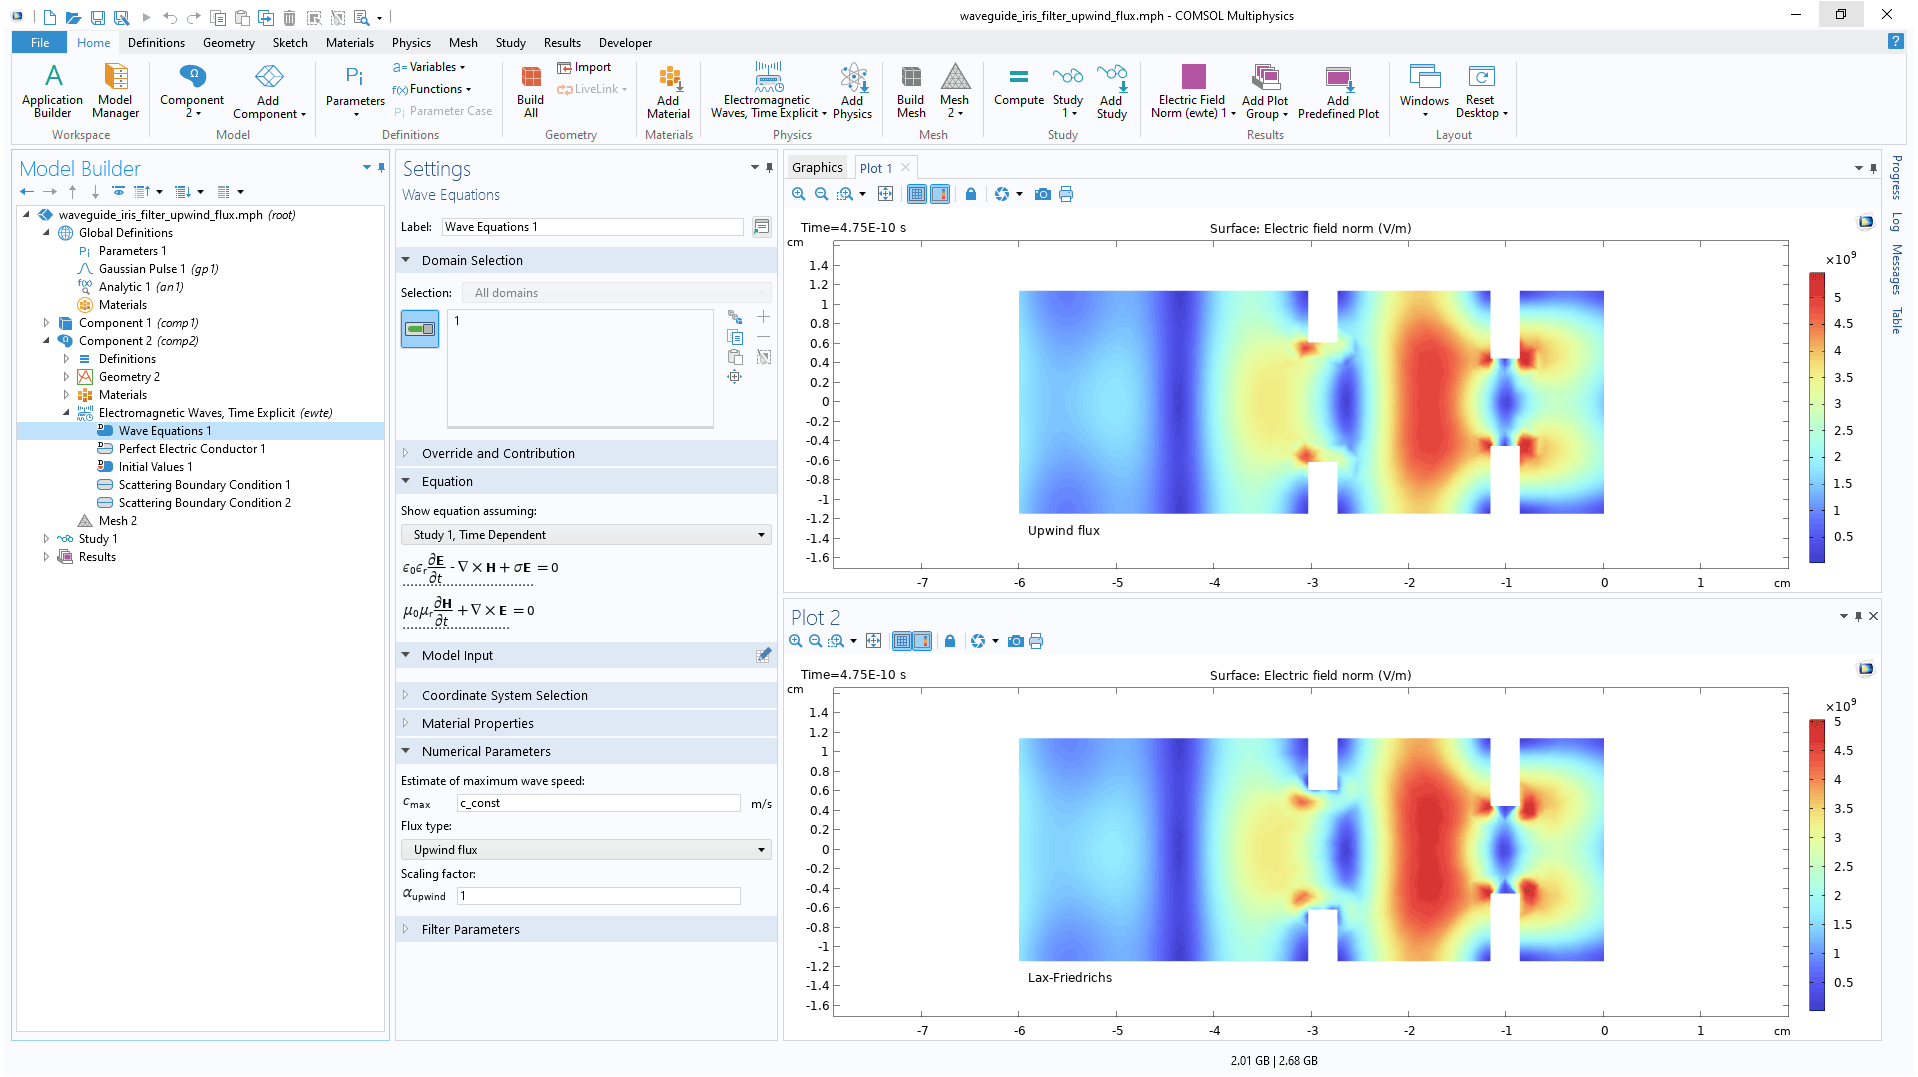 The COMSOL Multiphysics UI showing the Model Builder with the Wave Equations node selected, the corresponding settings, and two plots in the Graphics window.